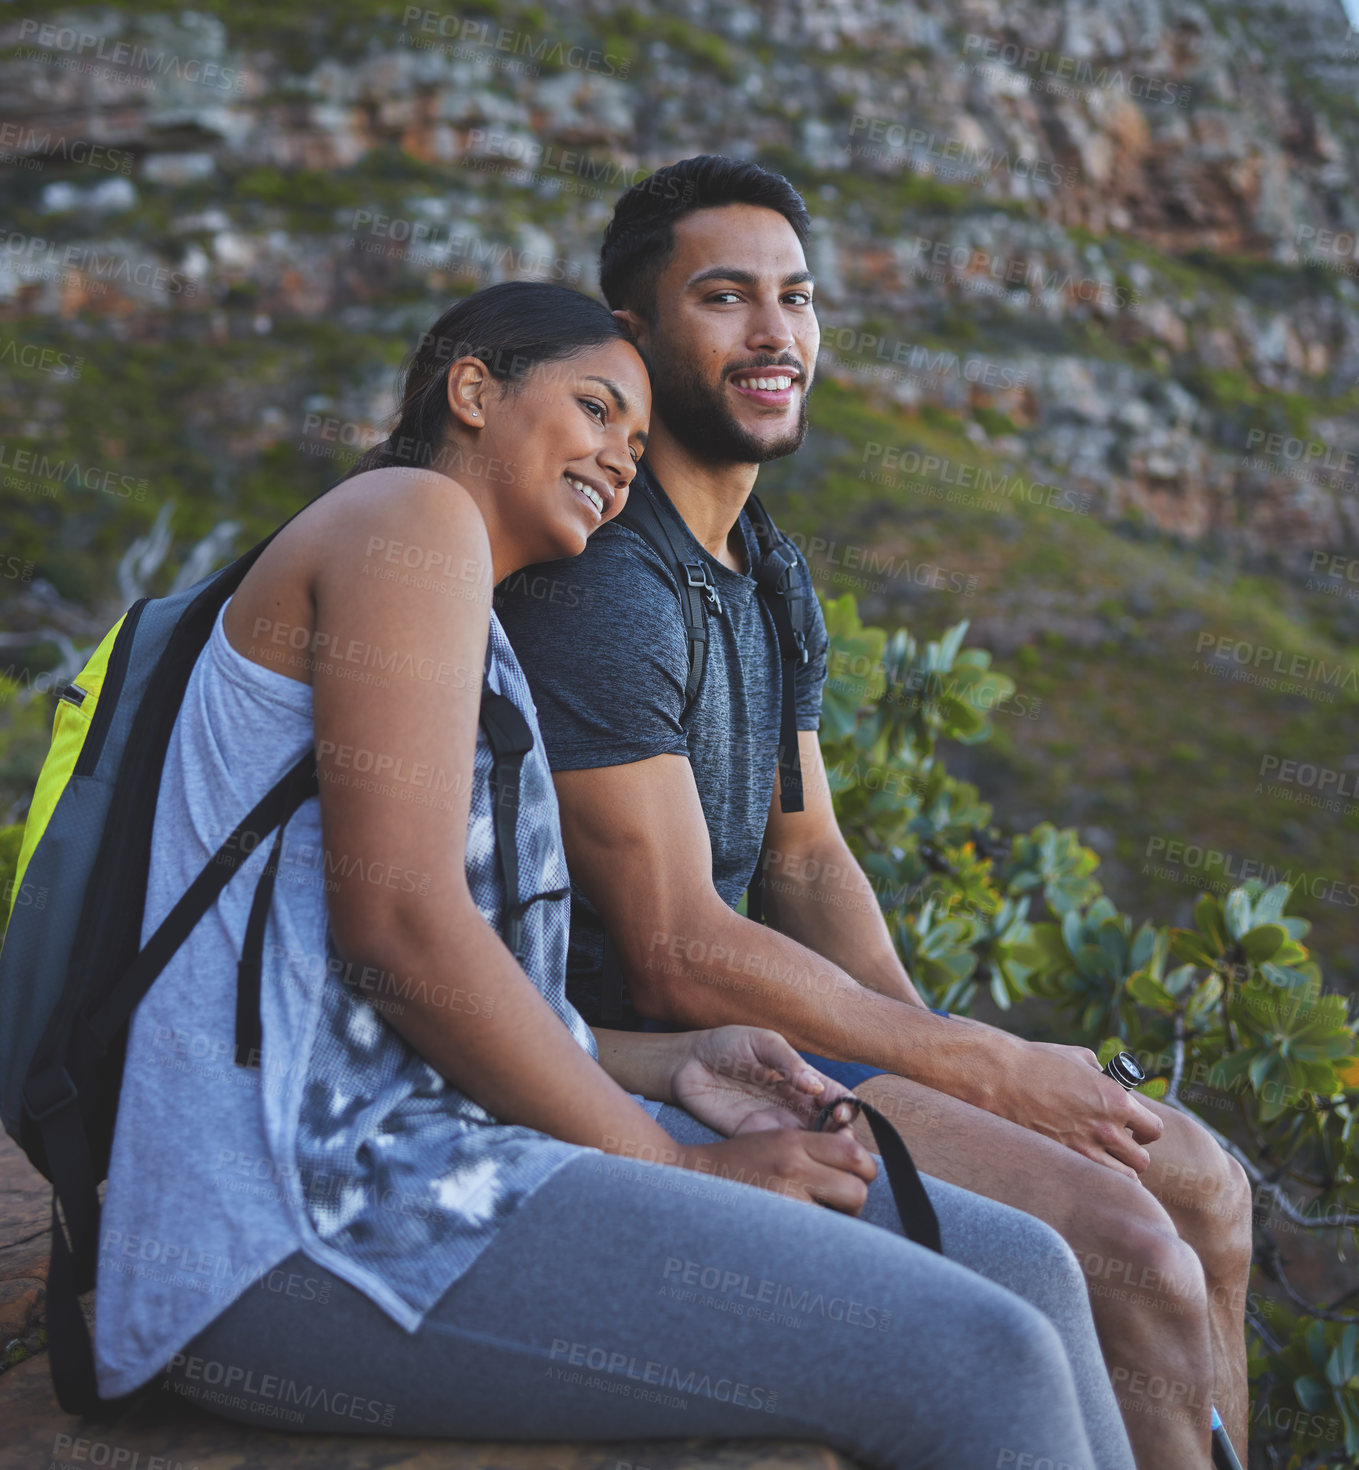 Buy stock photo Shot of a young couple enjoying the sunset view while out on a hike on a mountain range